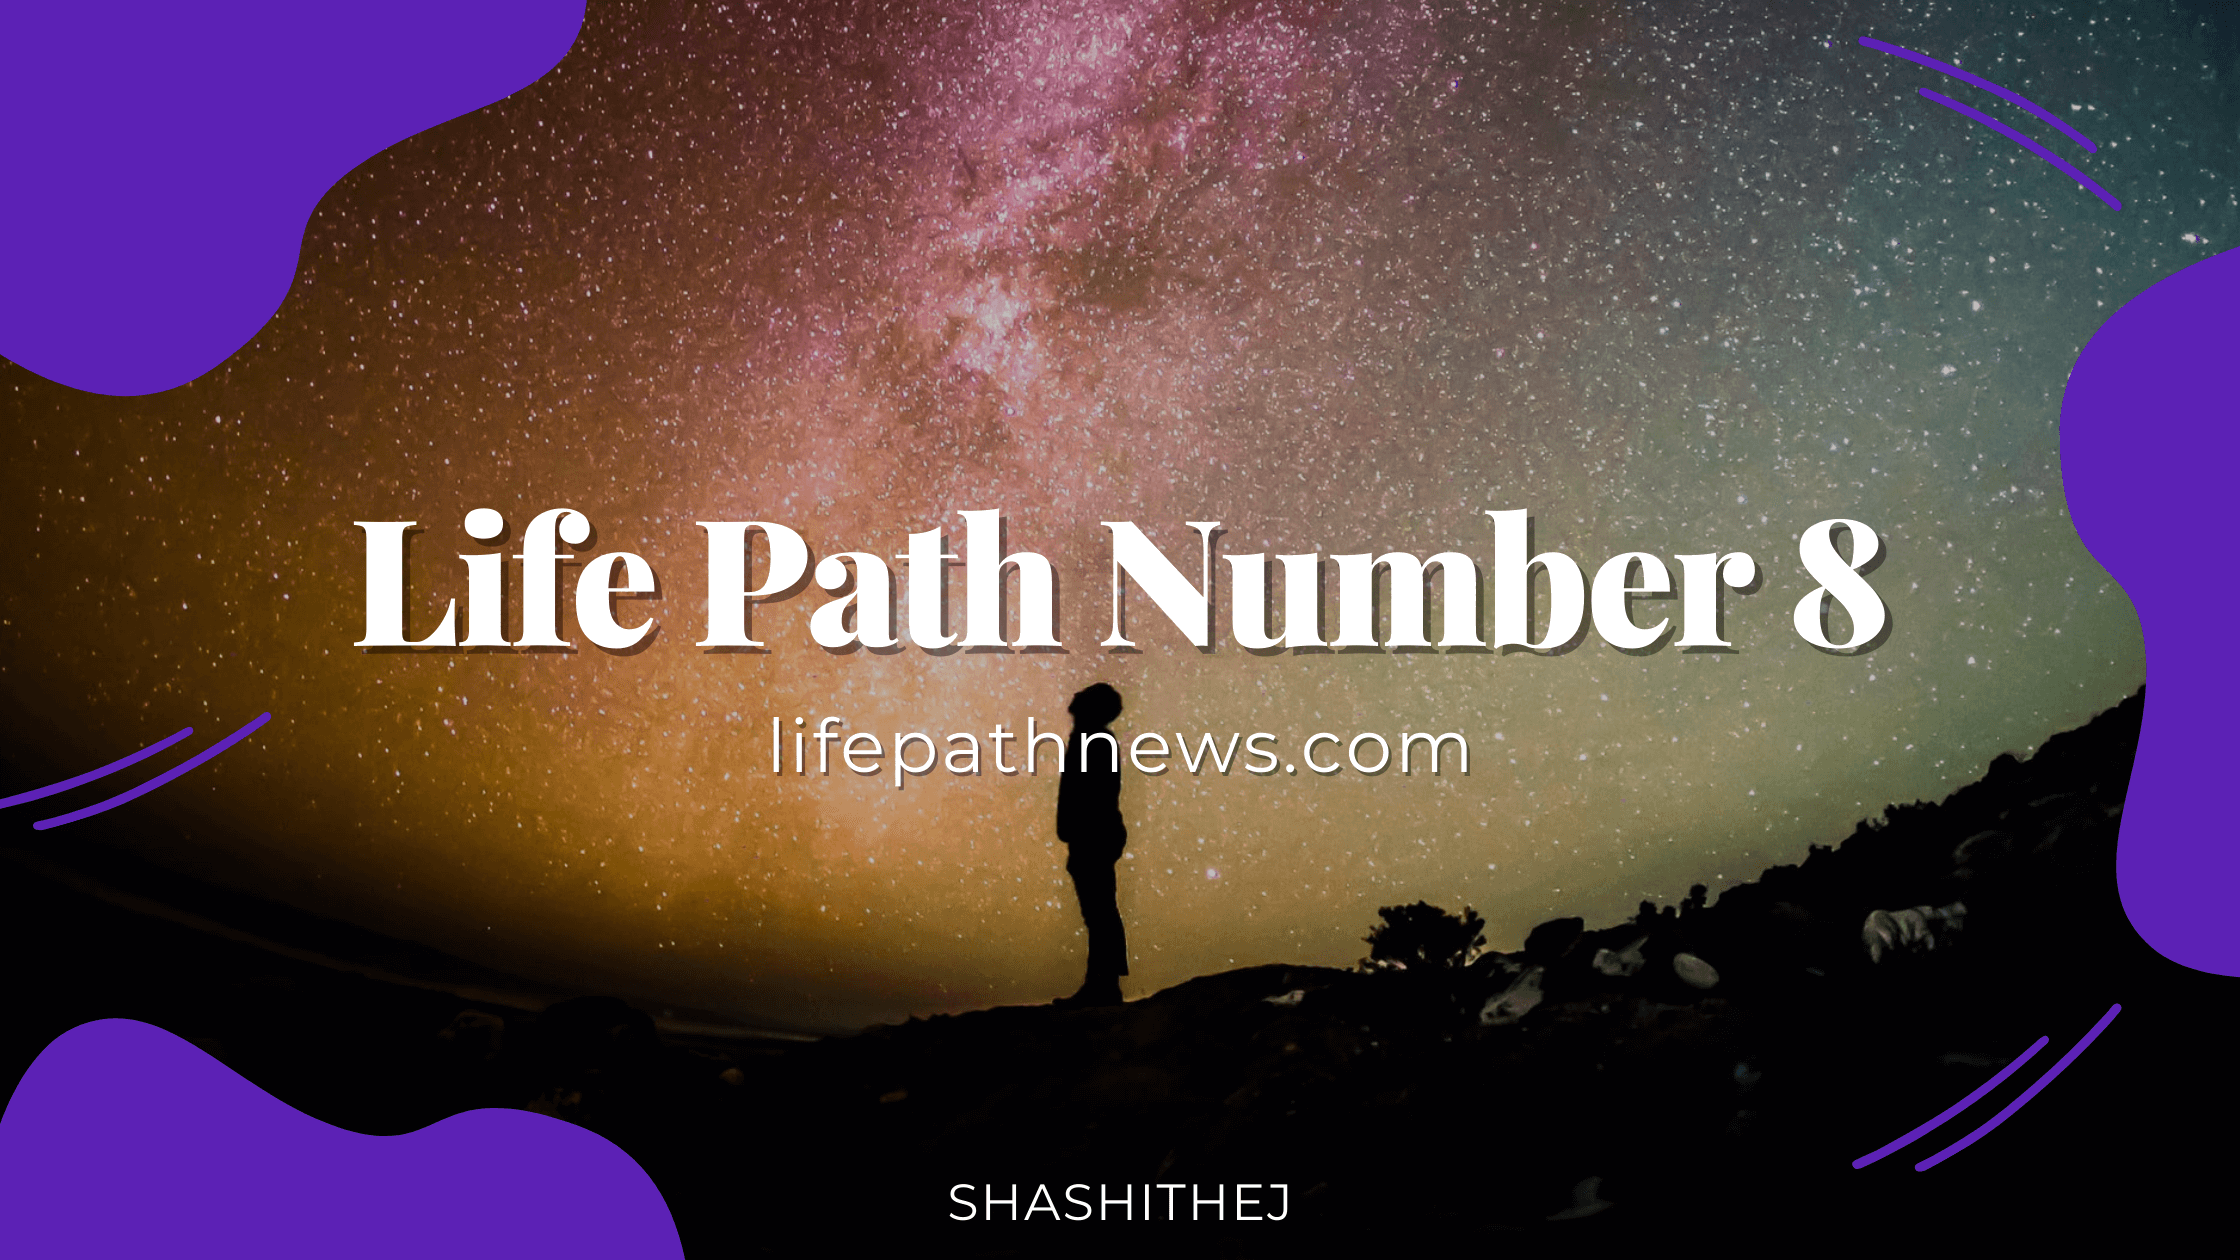 Life Path Number 8